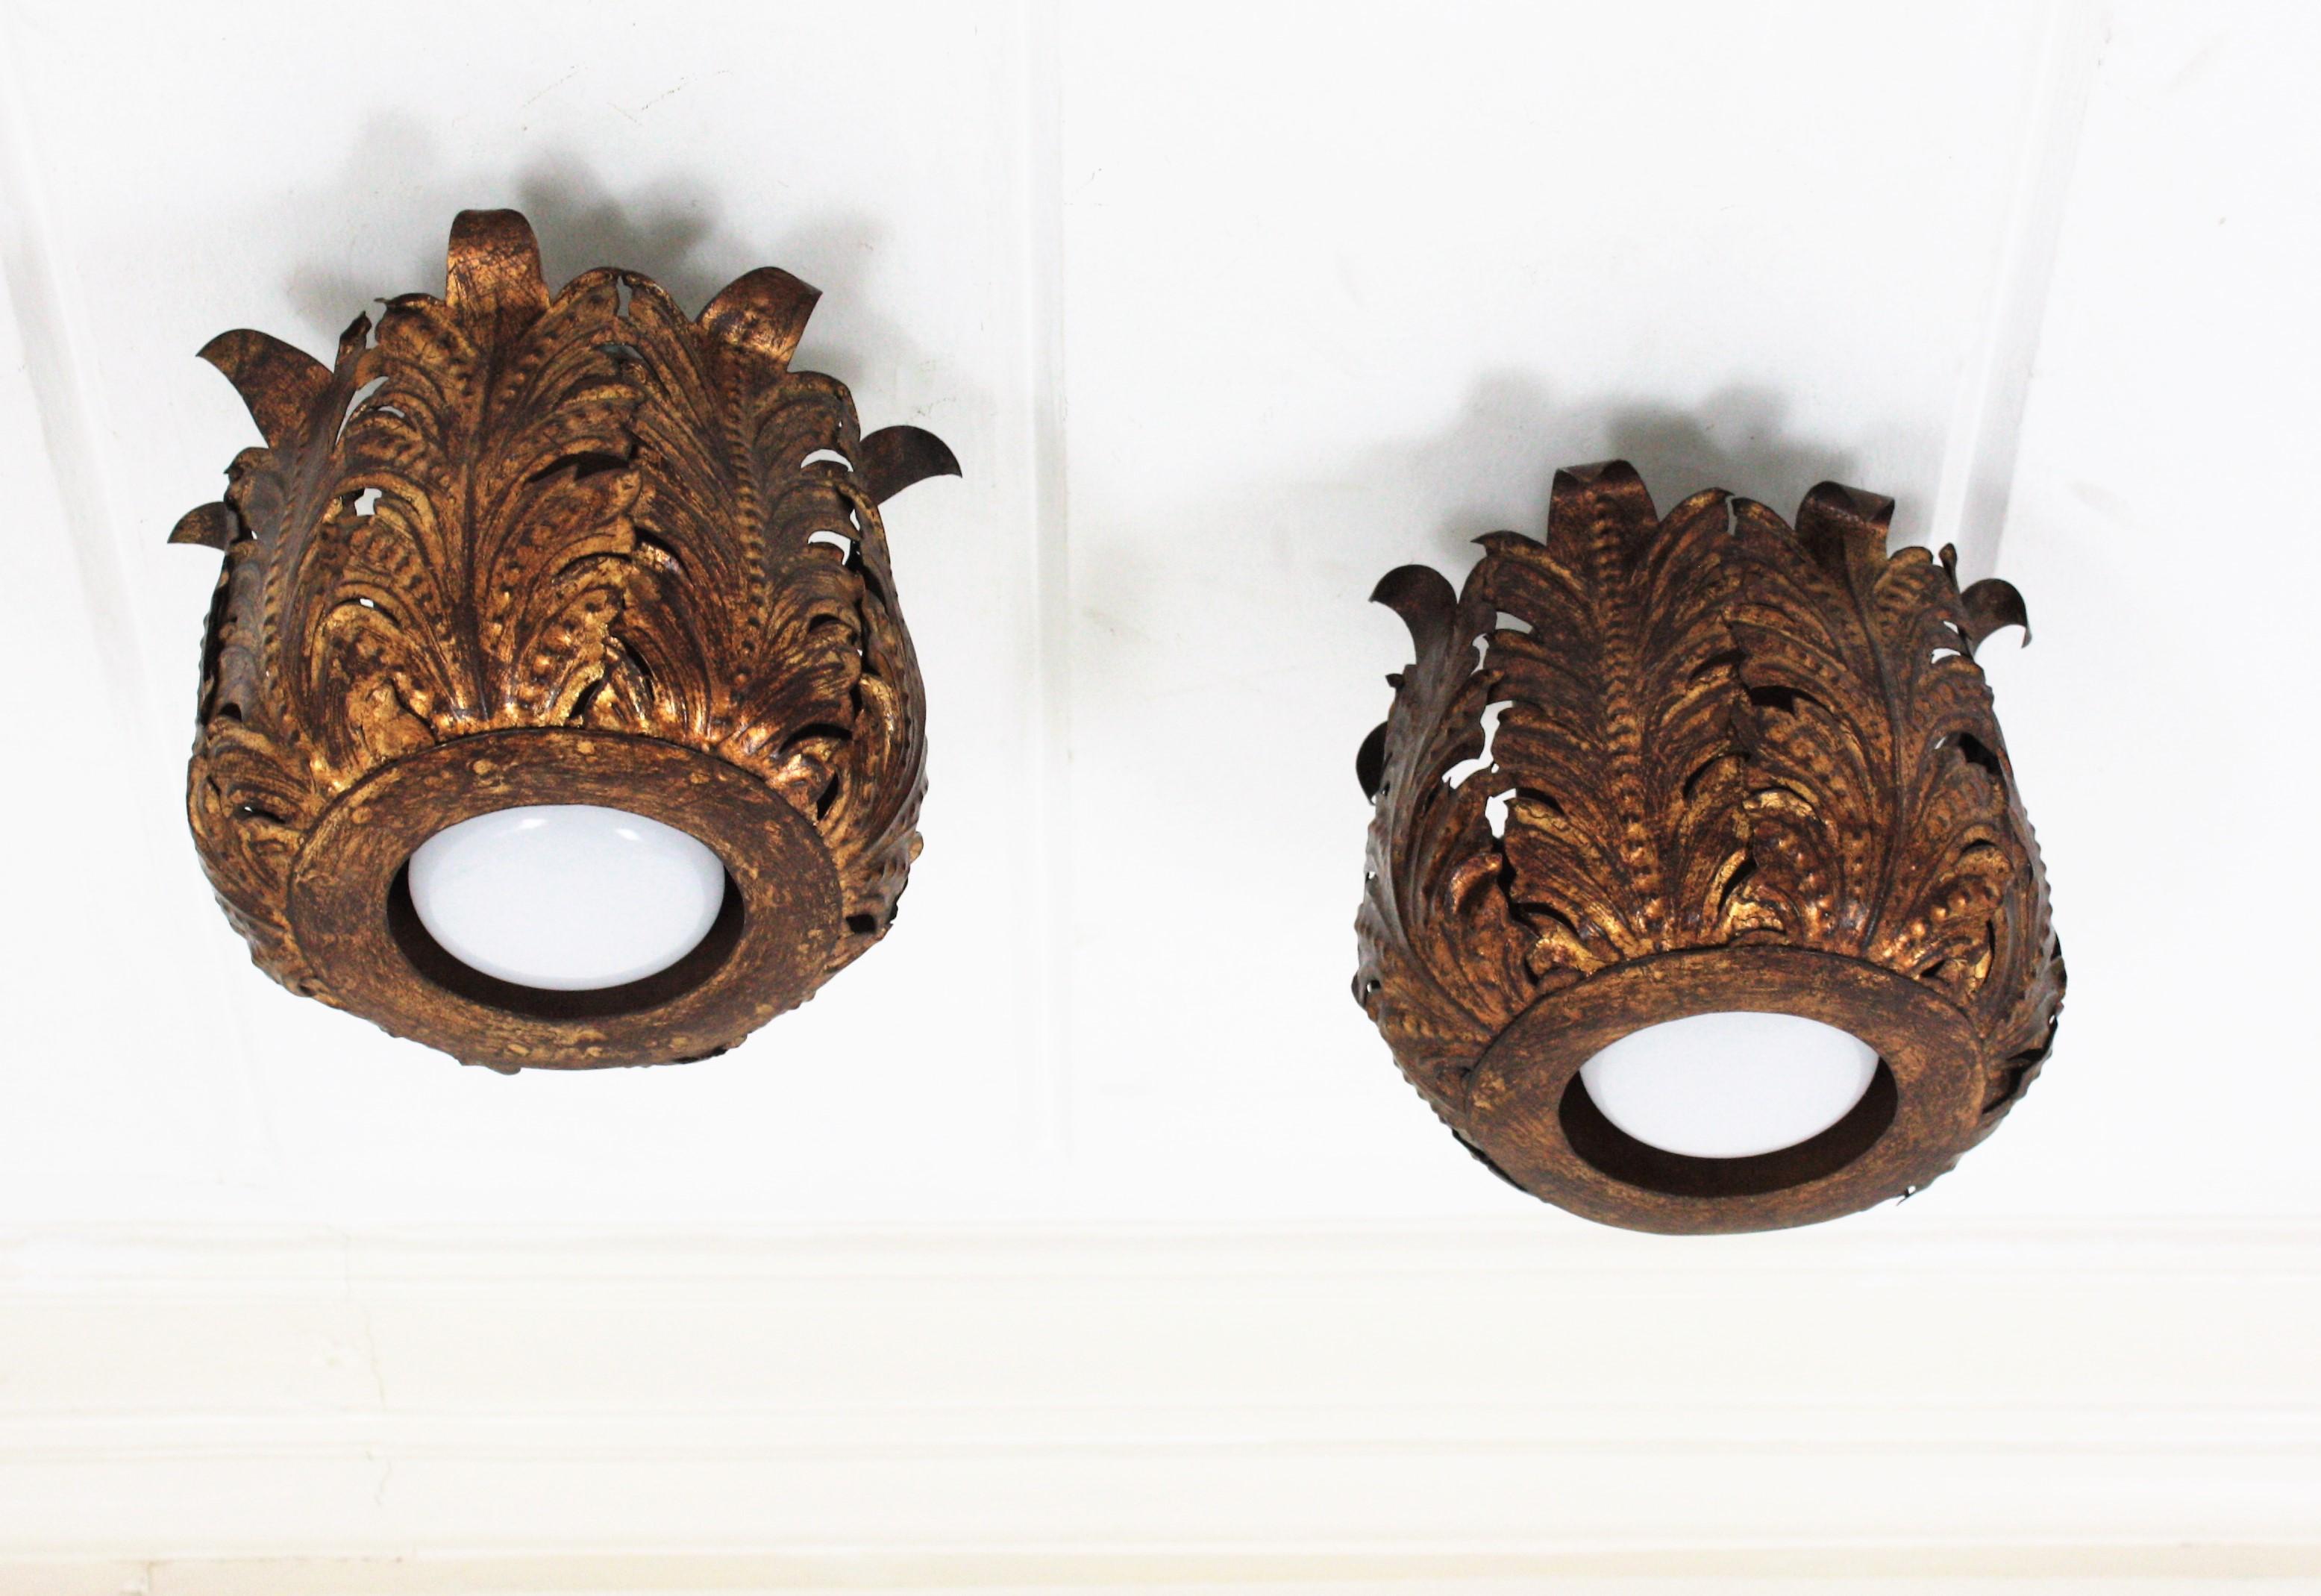 Pair of light fixtures in gilt iron with foliage design. Spain, 1940s.
These eye-catching flush mounts feature an structure made of gilt metal leaves surrounding a central light. They have a terrific patina with their original gold leaf finishing